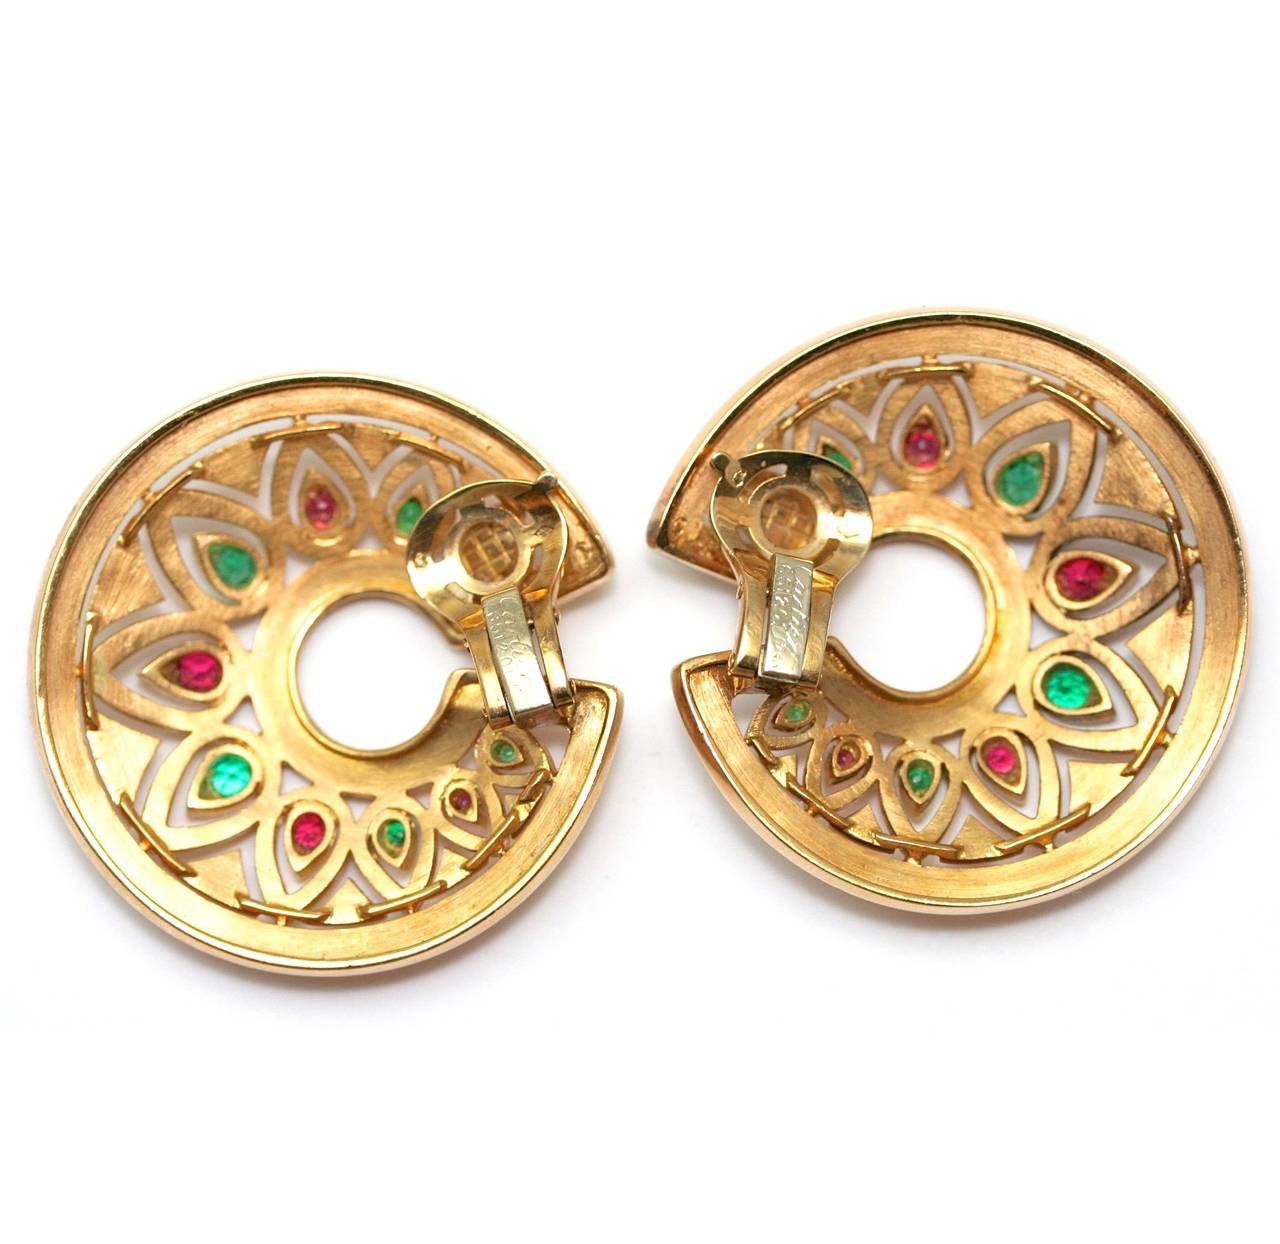 CARTIER ‘Tandjore’ circa 1980
Earclips in openwork sculpted gold hoop with ruby and emeralds, signed and numbered 651201, diameter 40mm, with Cartier pochette (51,45 grams)